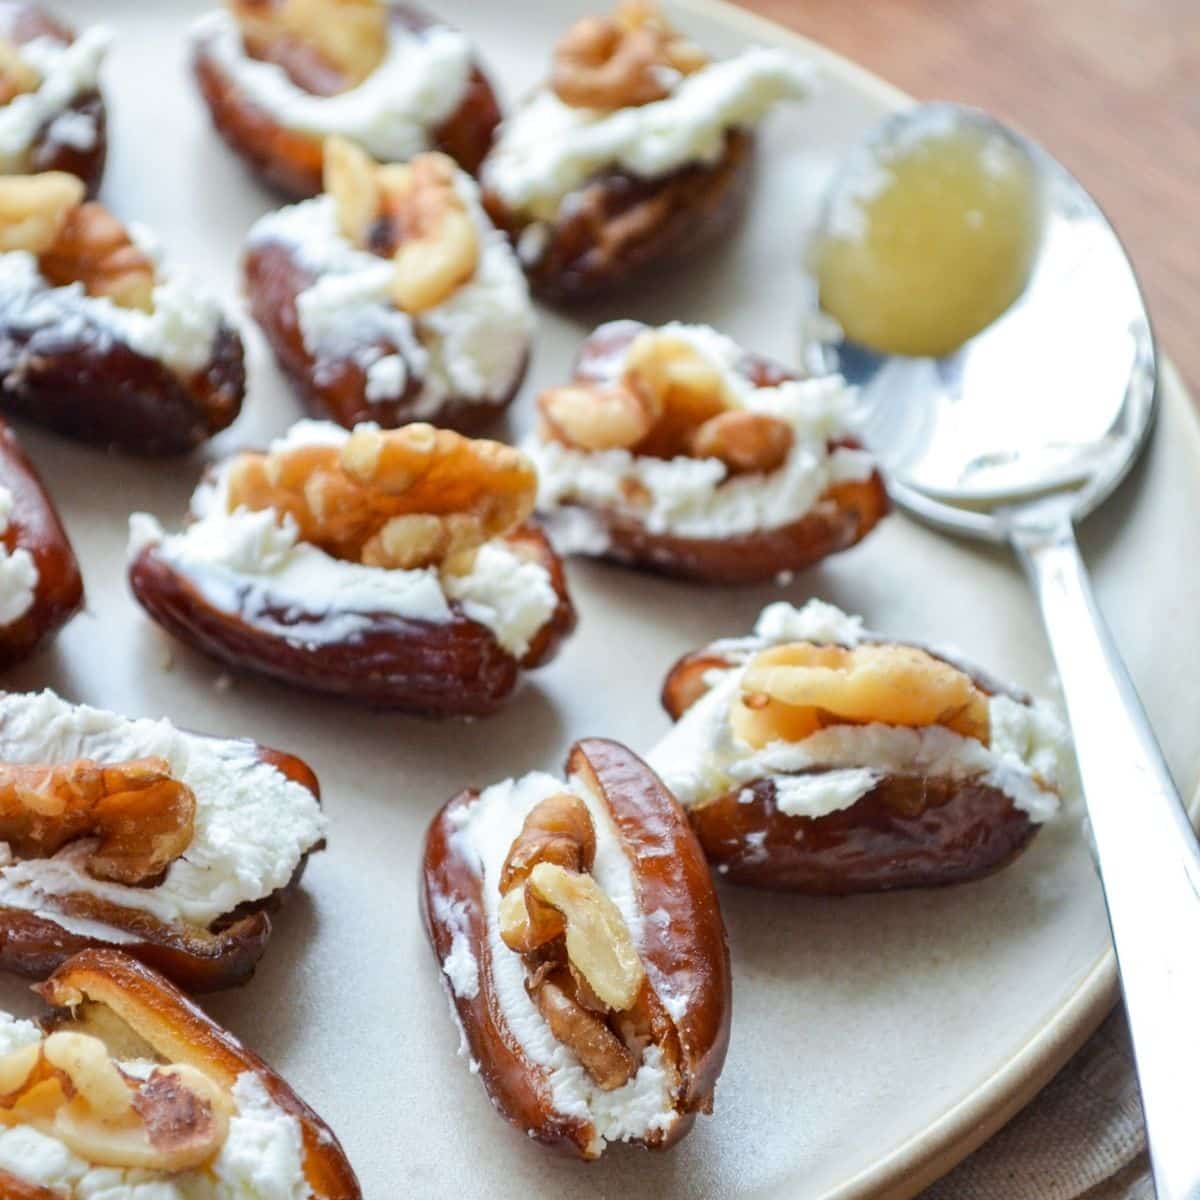 Stuffed Dates with Goat Cheese and Walnuts